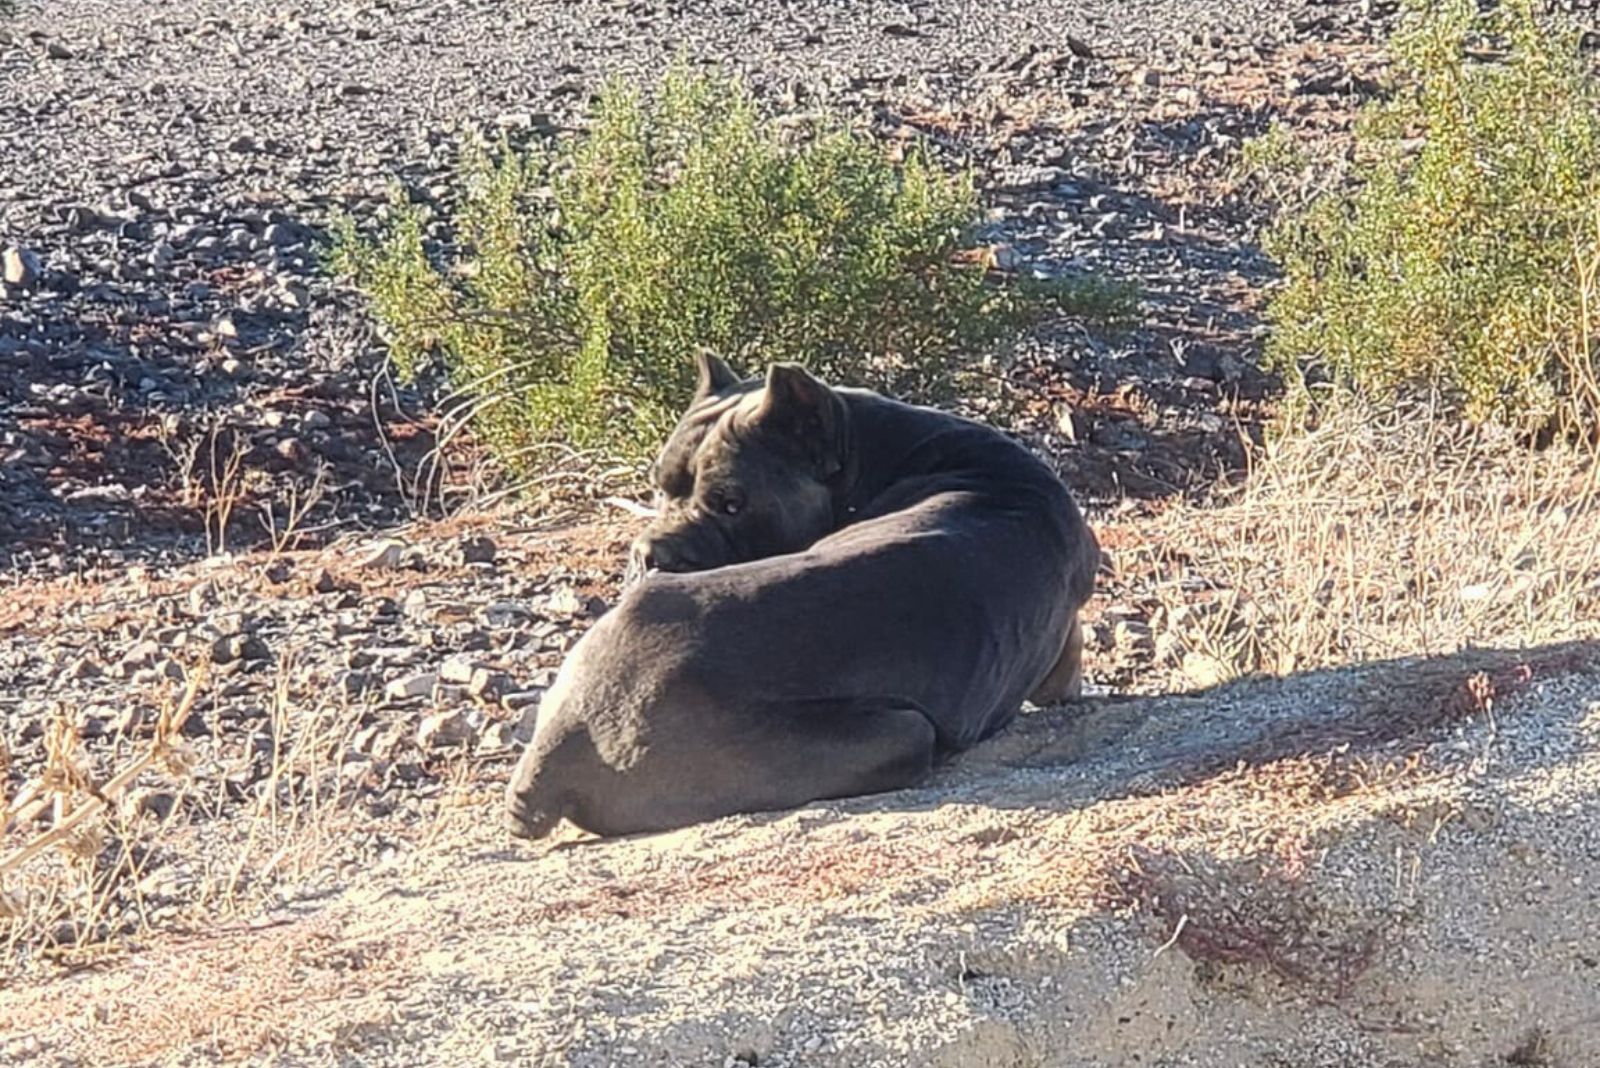 cane corso curled up in the desert